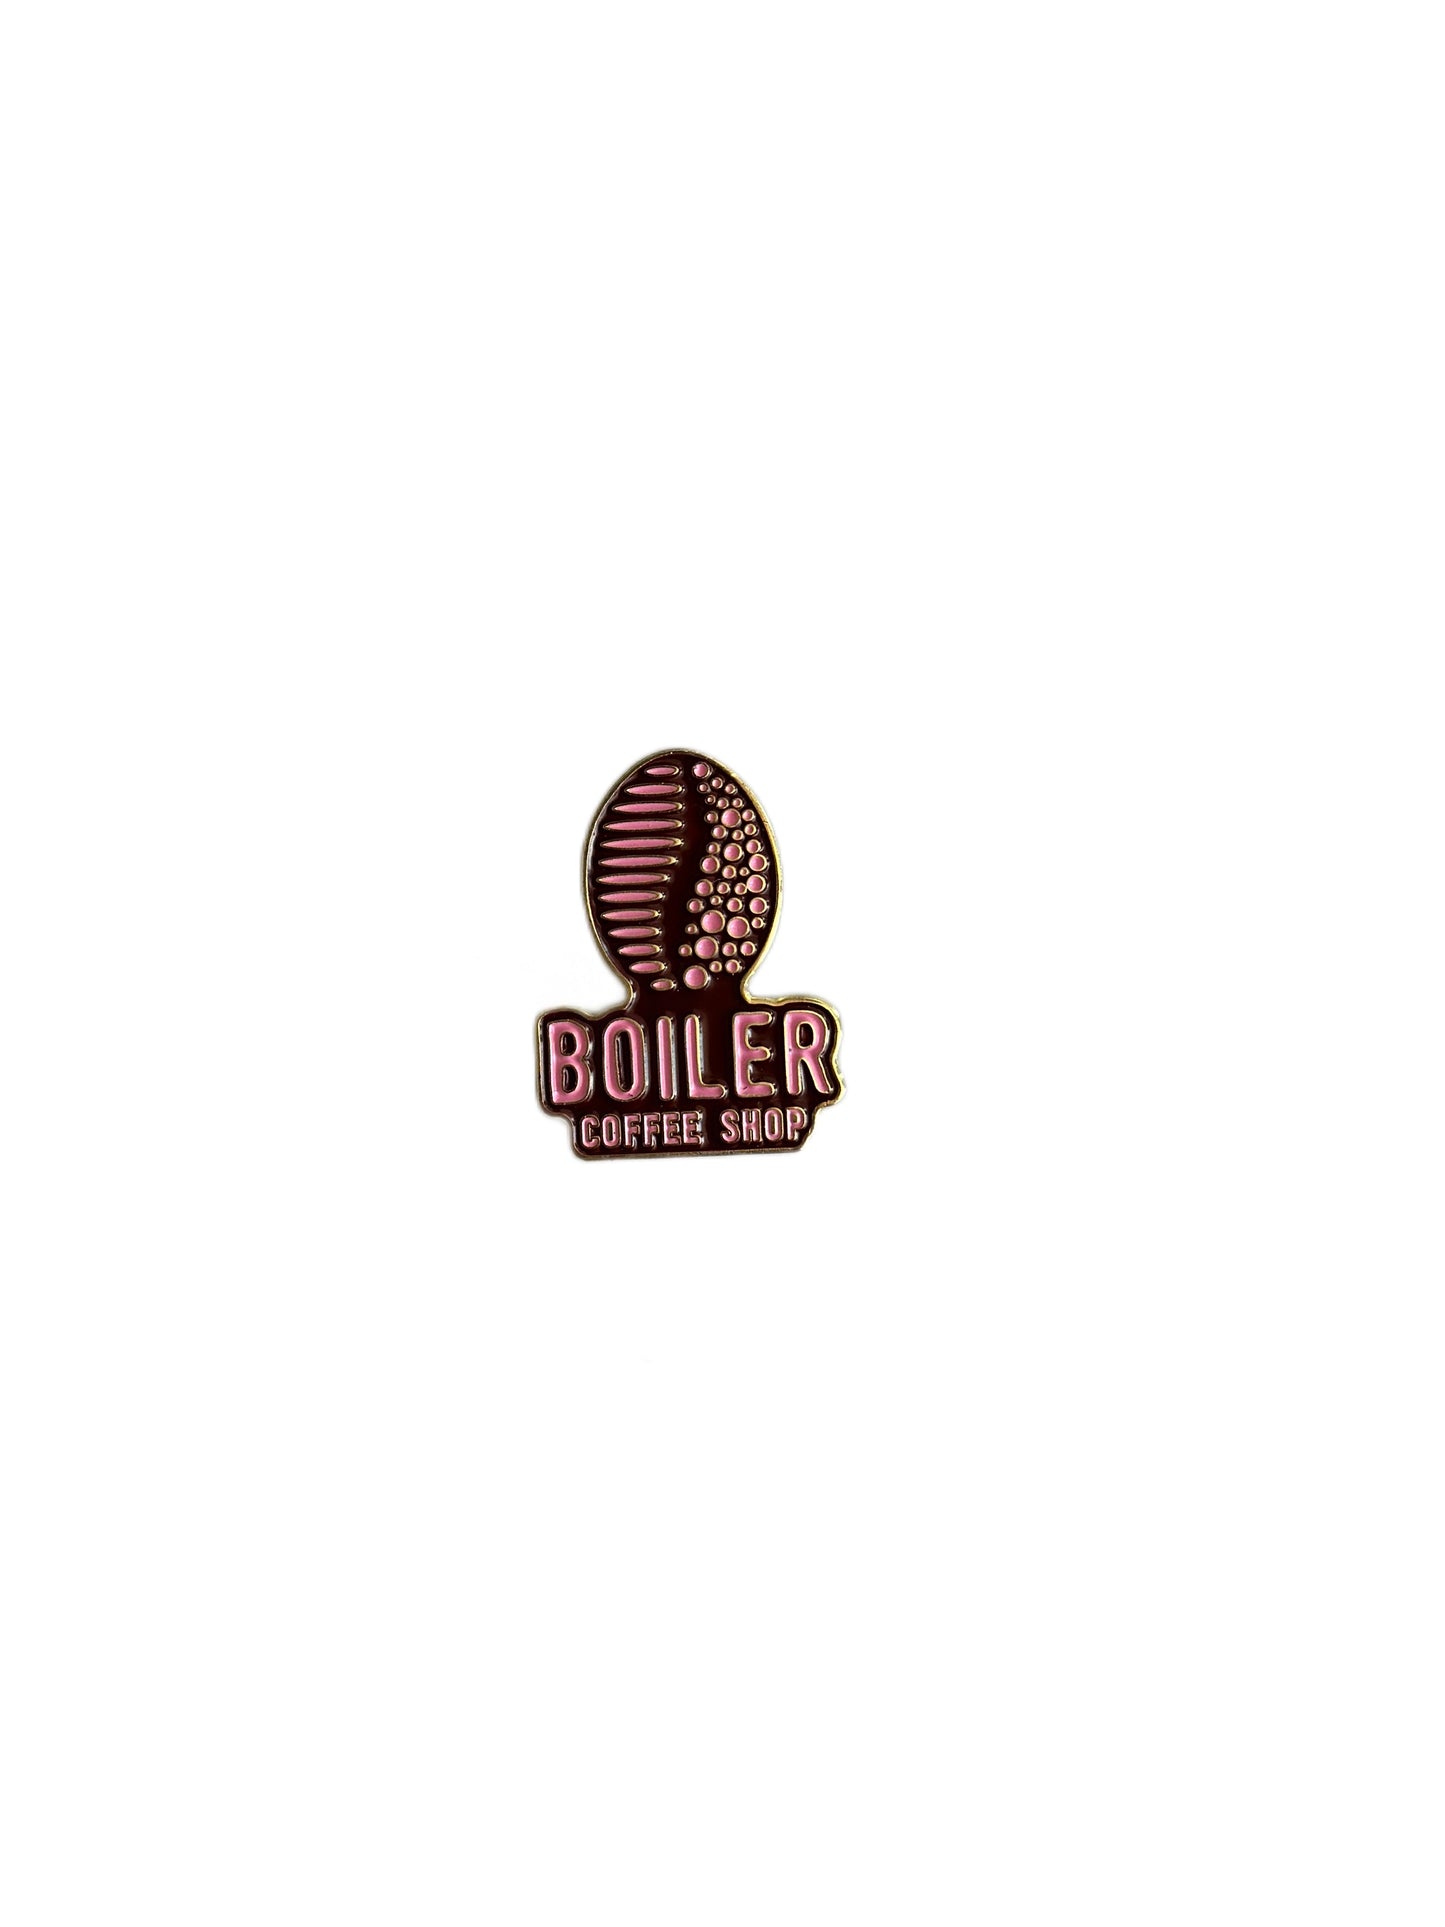 Pin for Boiler Coffee Shop